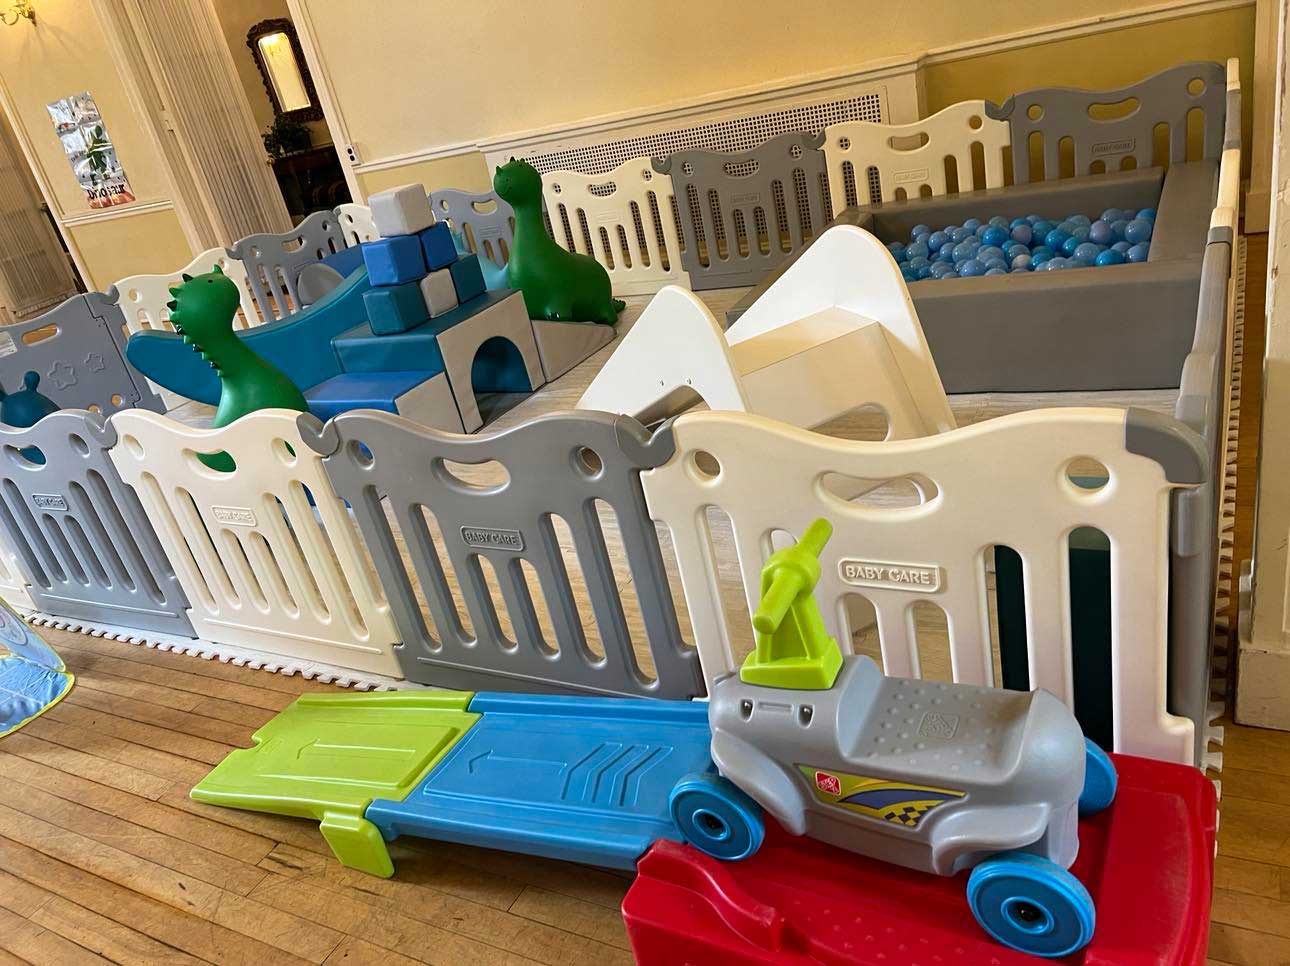 Toddler's Birthday Venue Play Area at the Woman's Club of Ridgewood